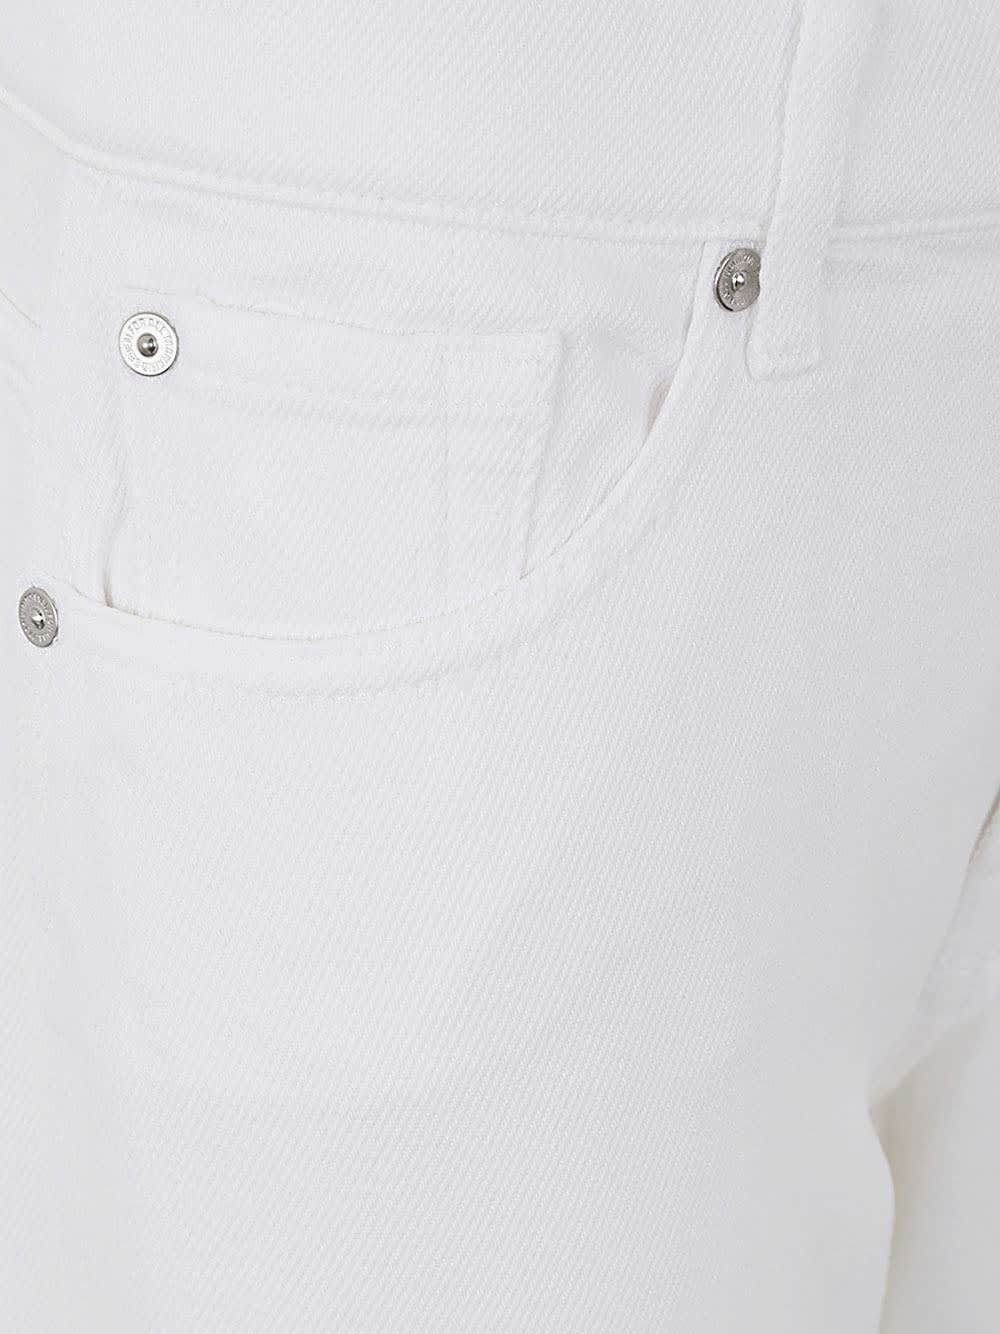 Shop 7 For All Mankind Tess Trouser Colored Tencel In White